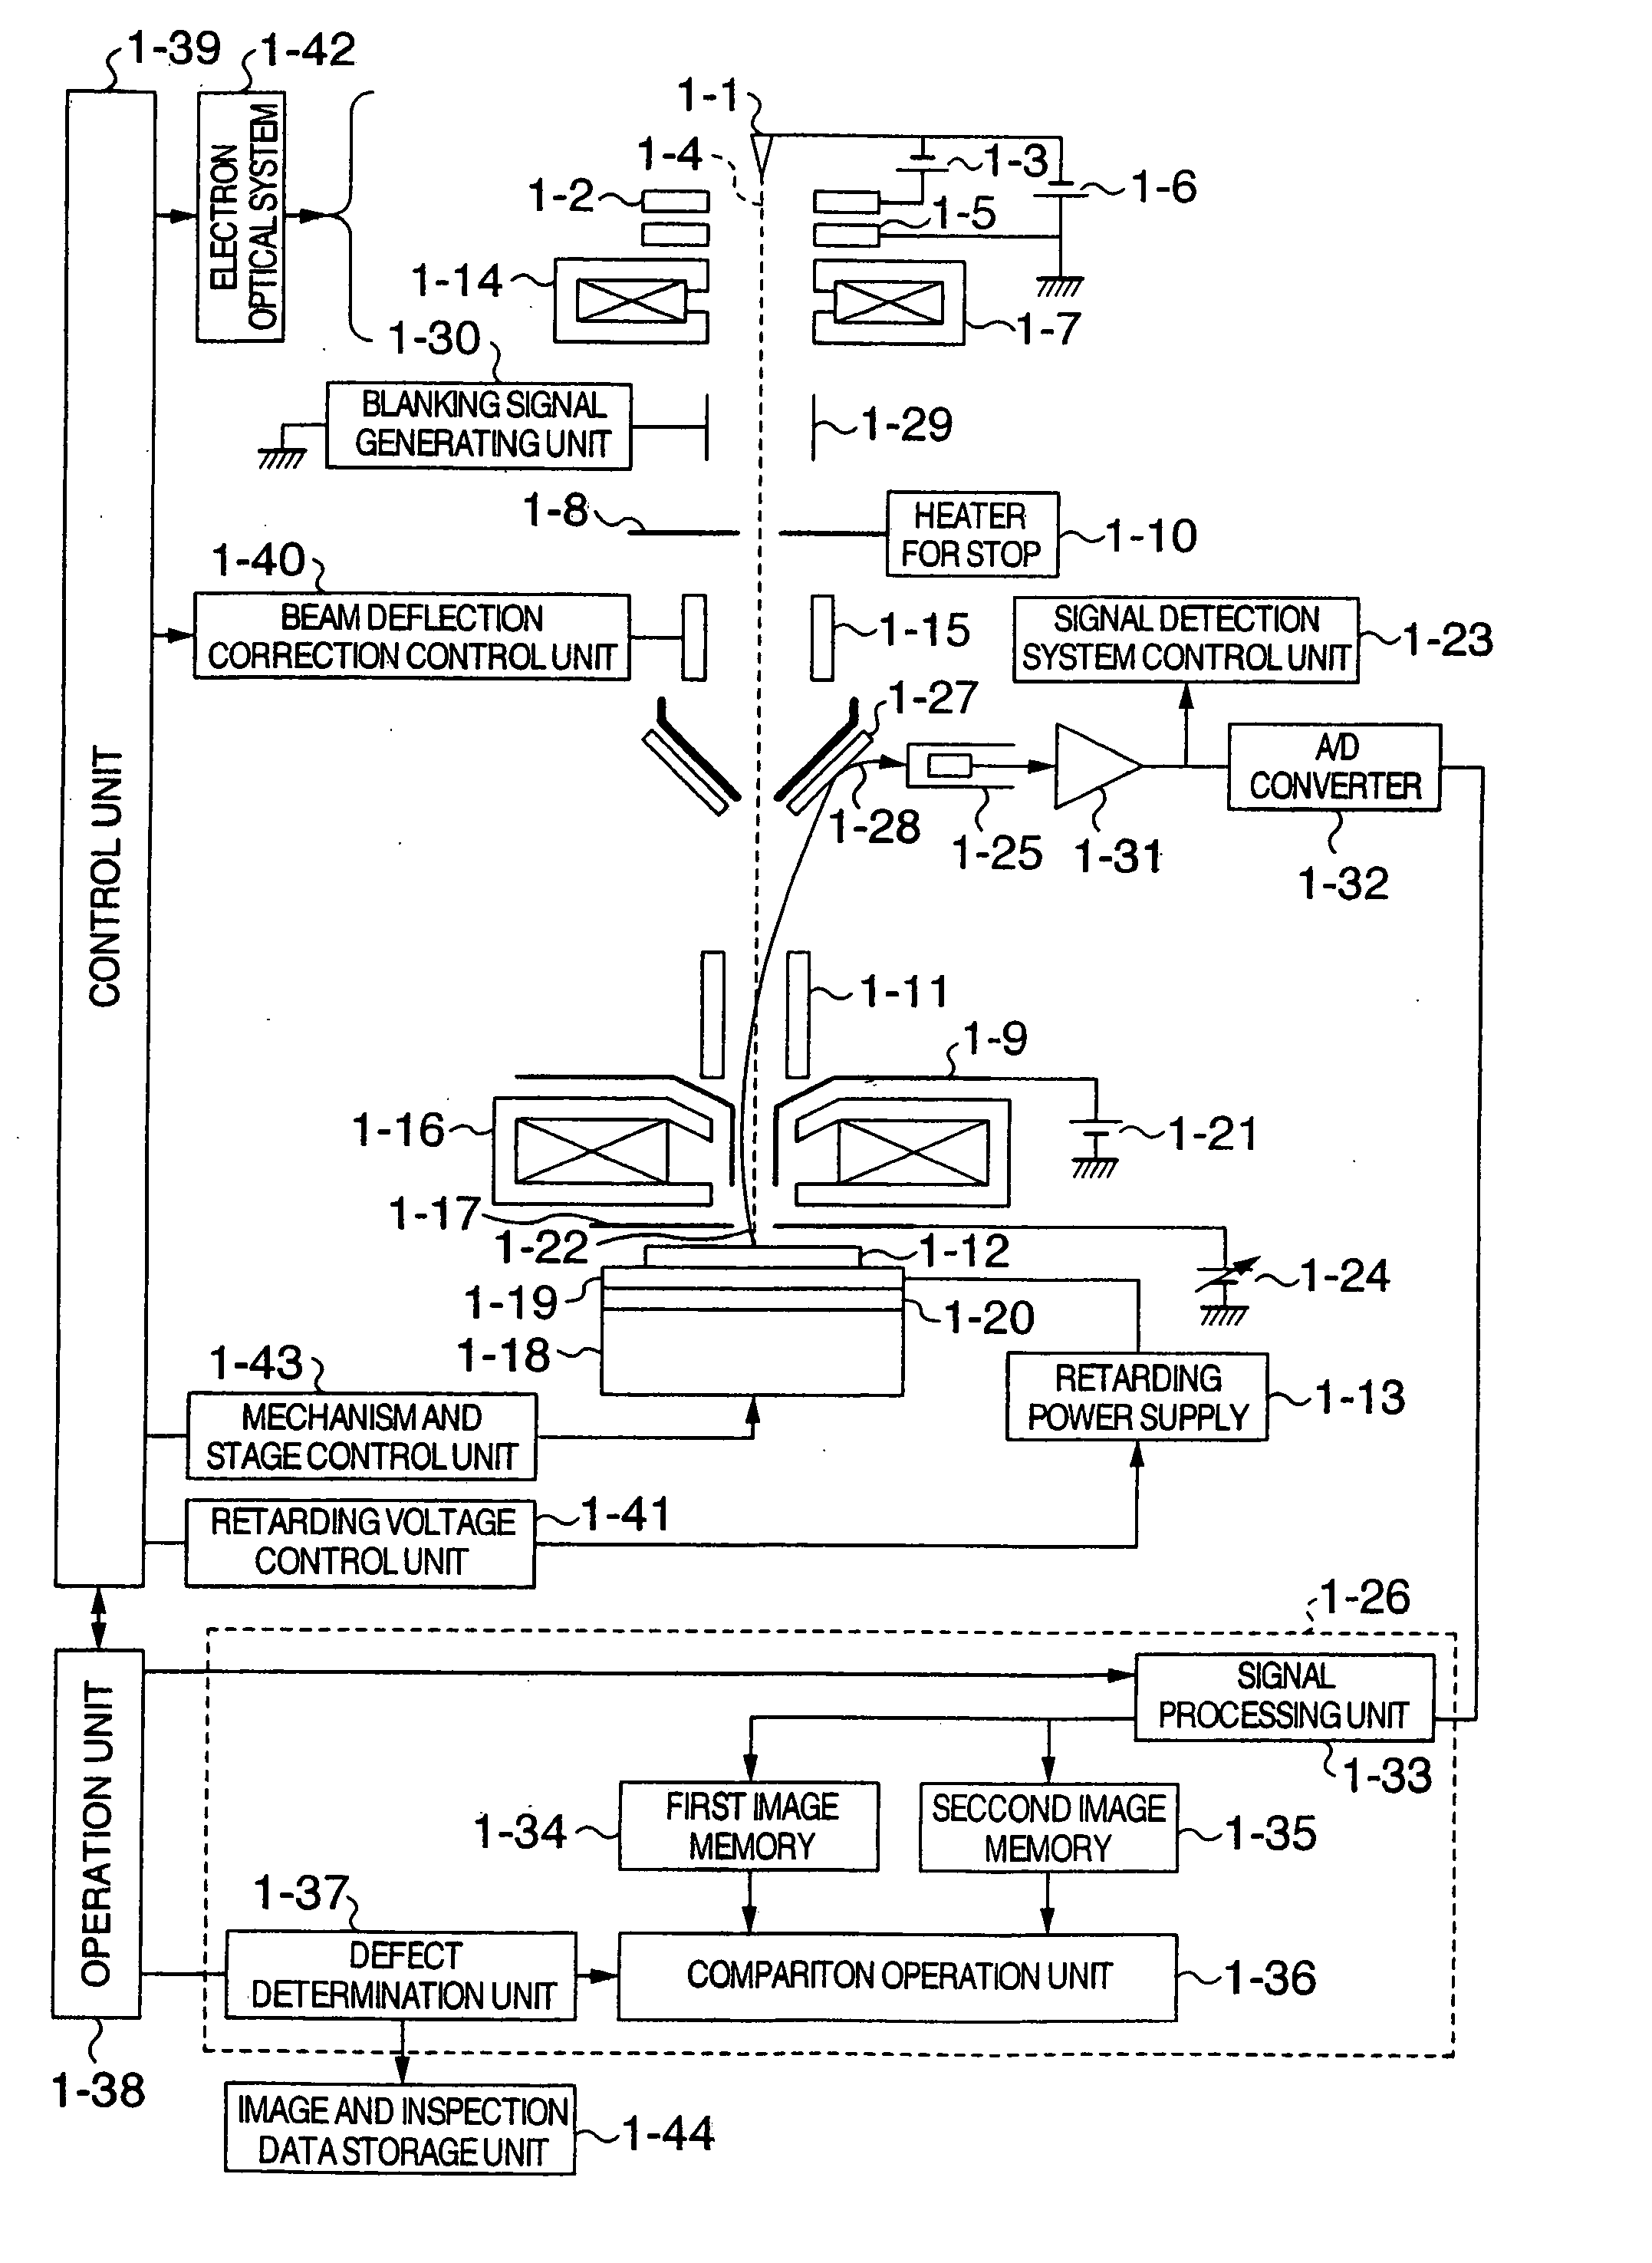 Method and apparatus for inspecting patterns